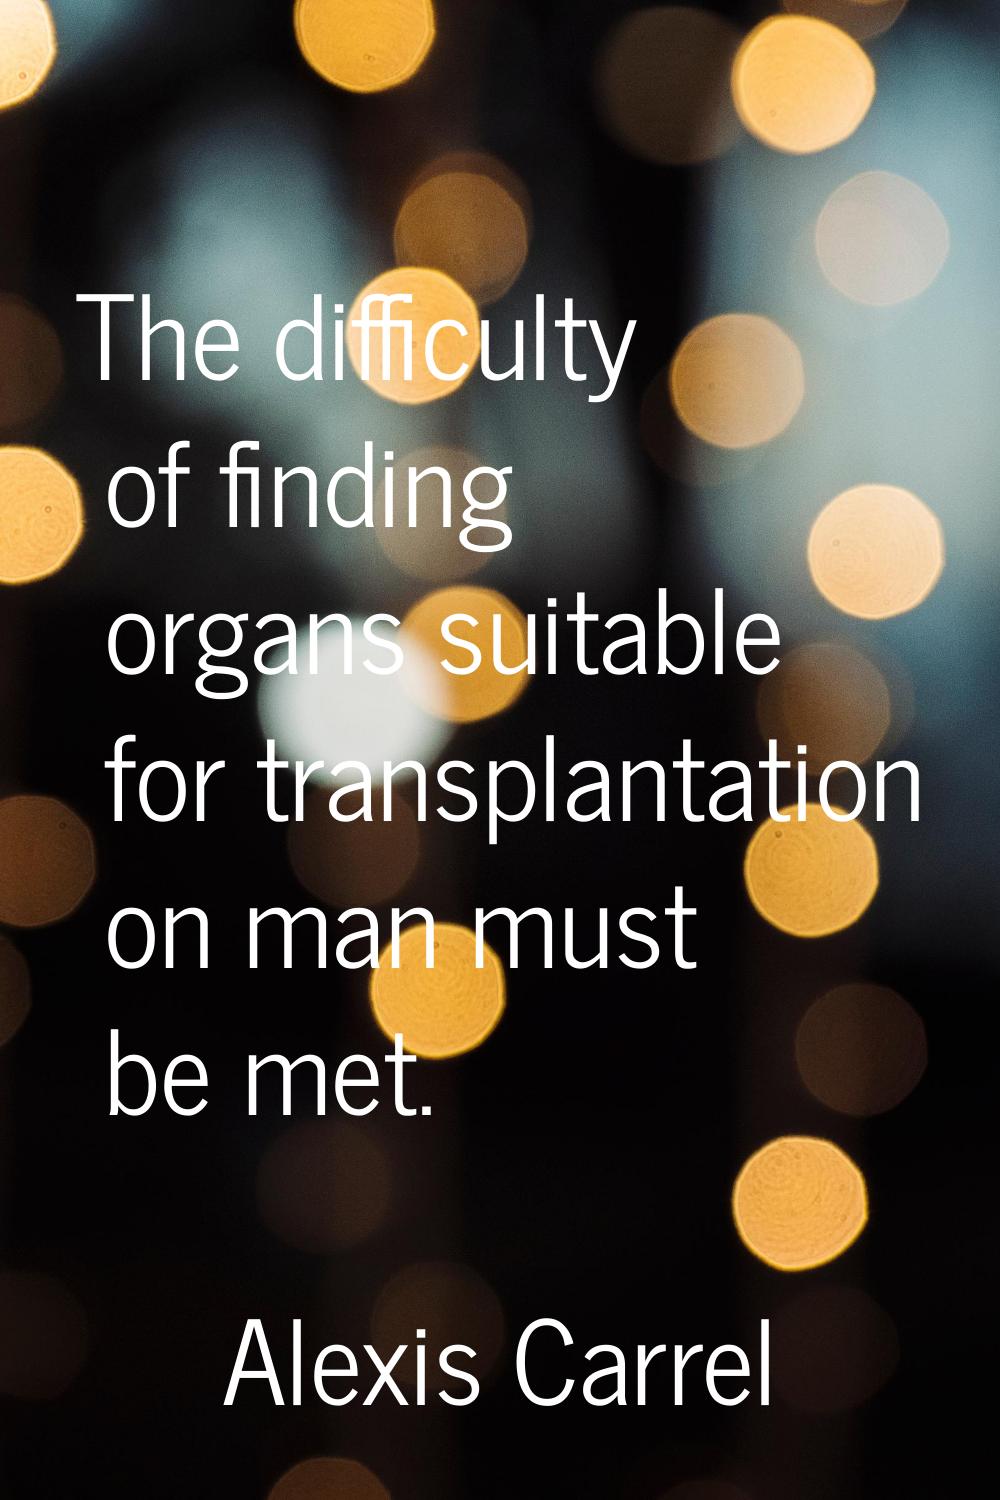 The difficulty of finding organs suitable for transplantation on man must be met.